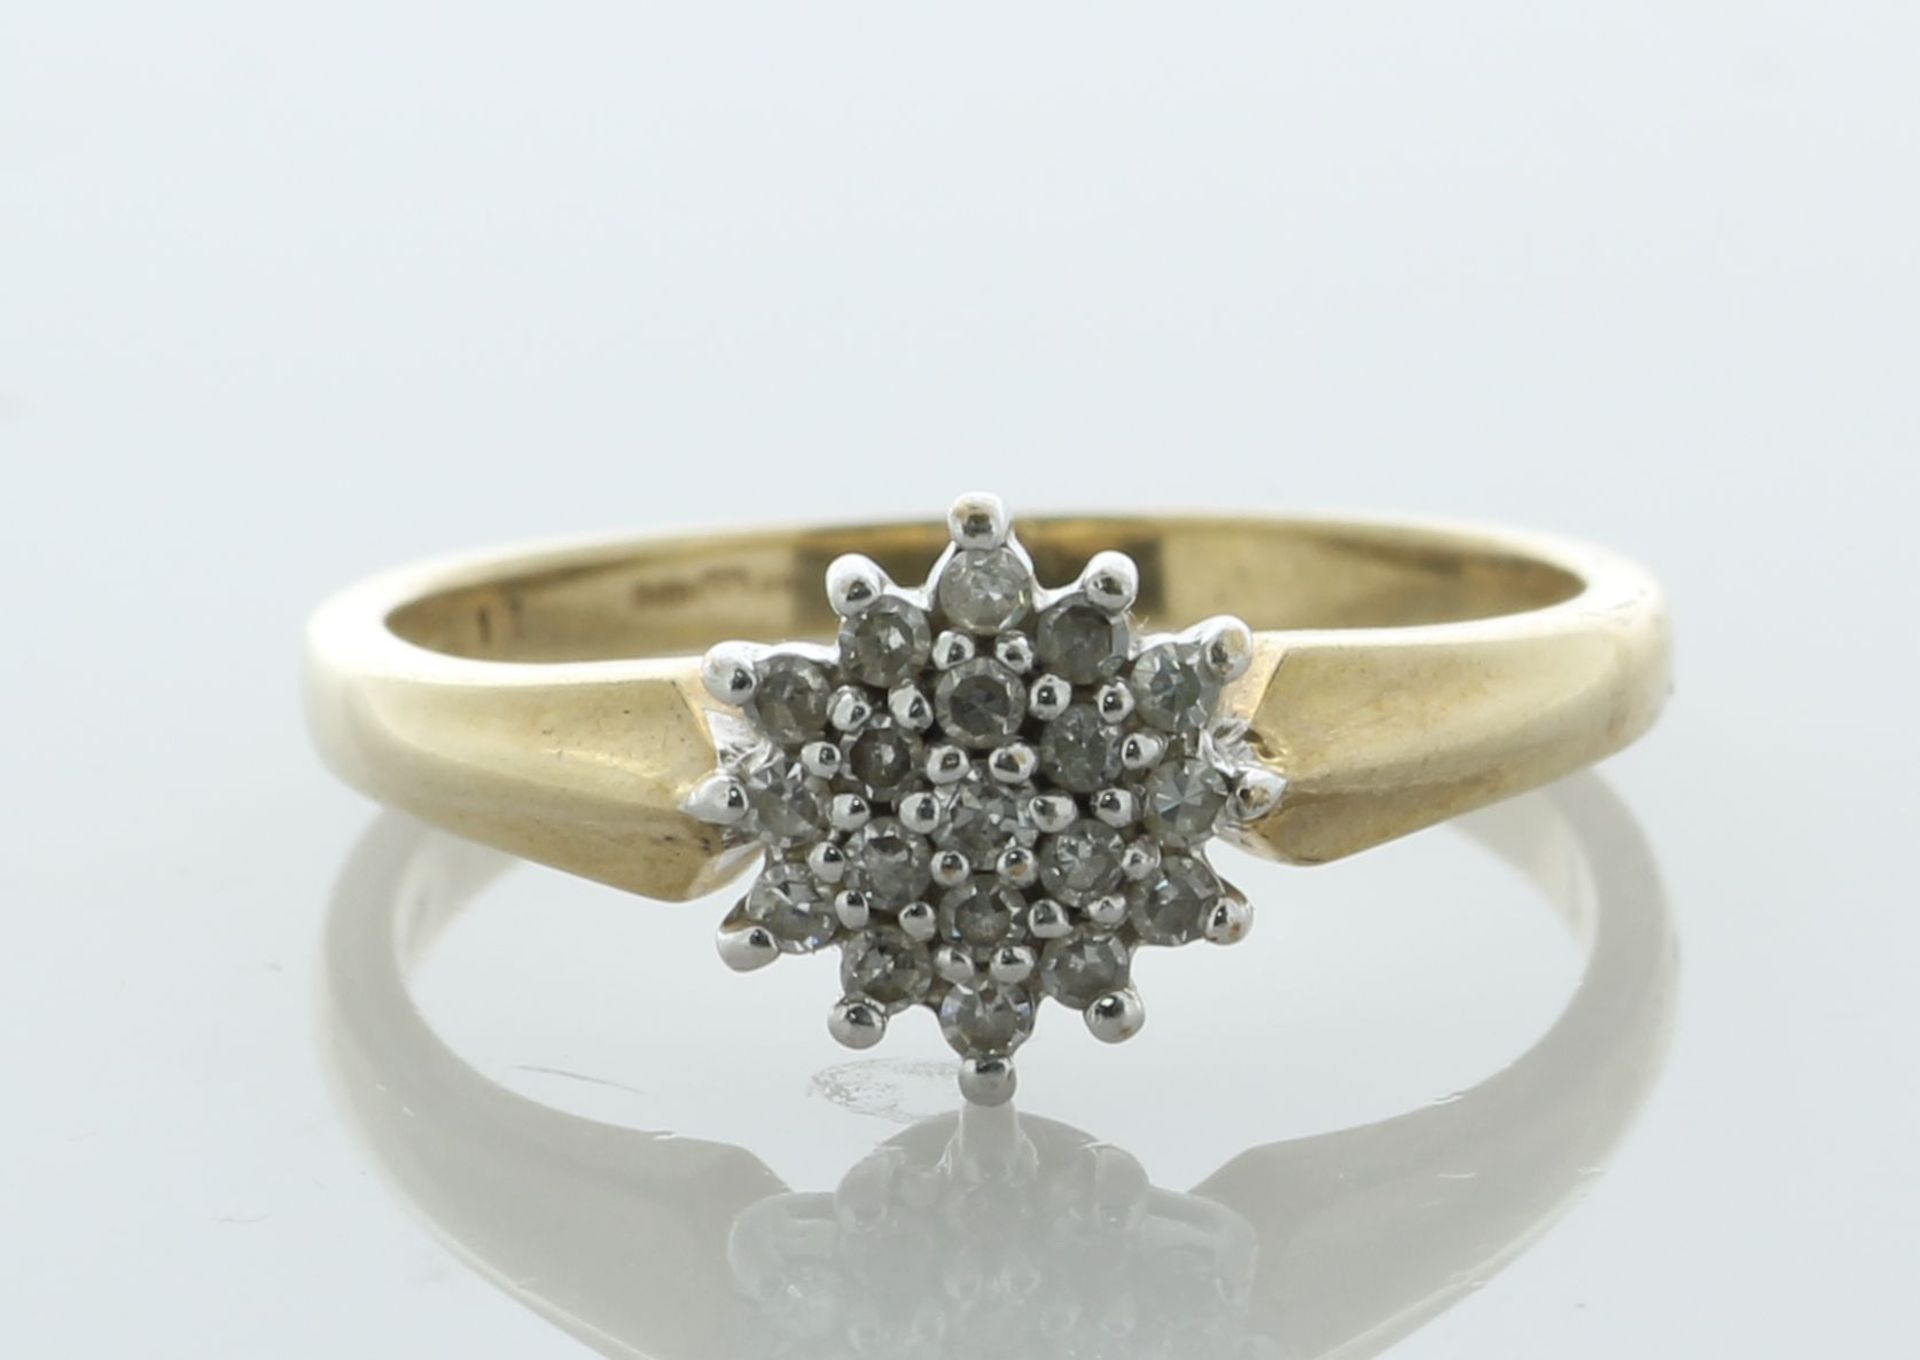 9ct Yellow Gold Diamond Ring 0.12 Carats - Valued By AGI £870.00 - A twist on the classic - Image 3 of 6